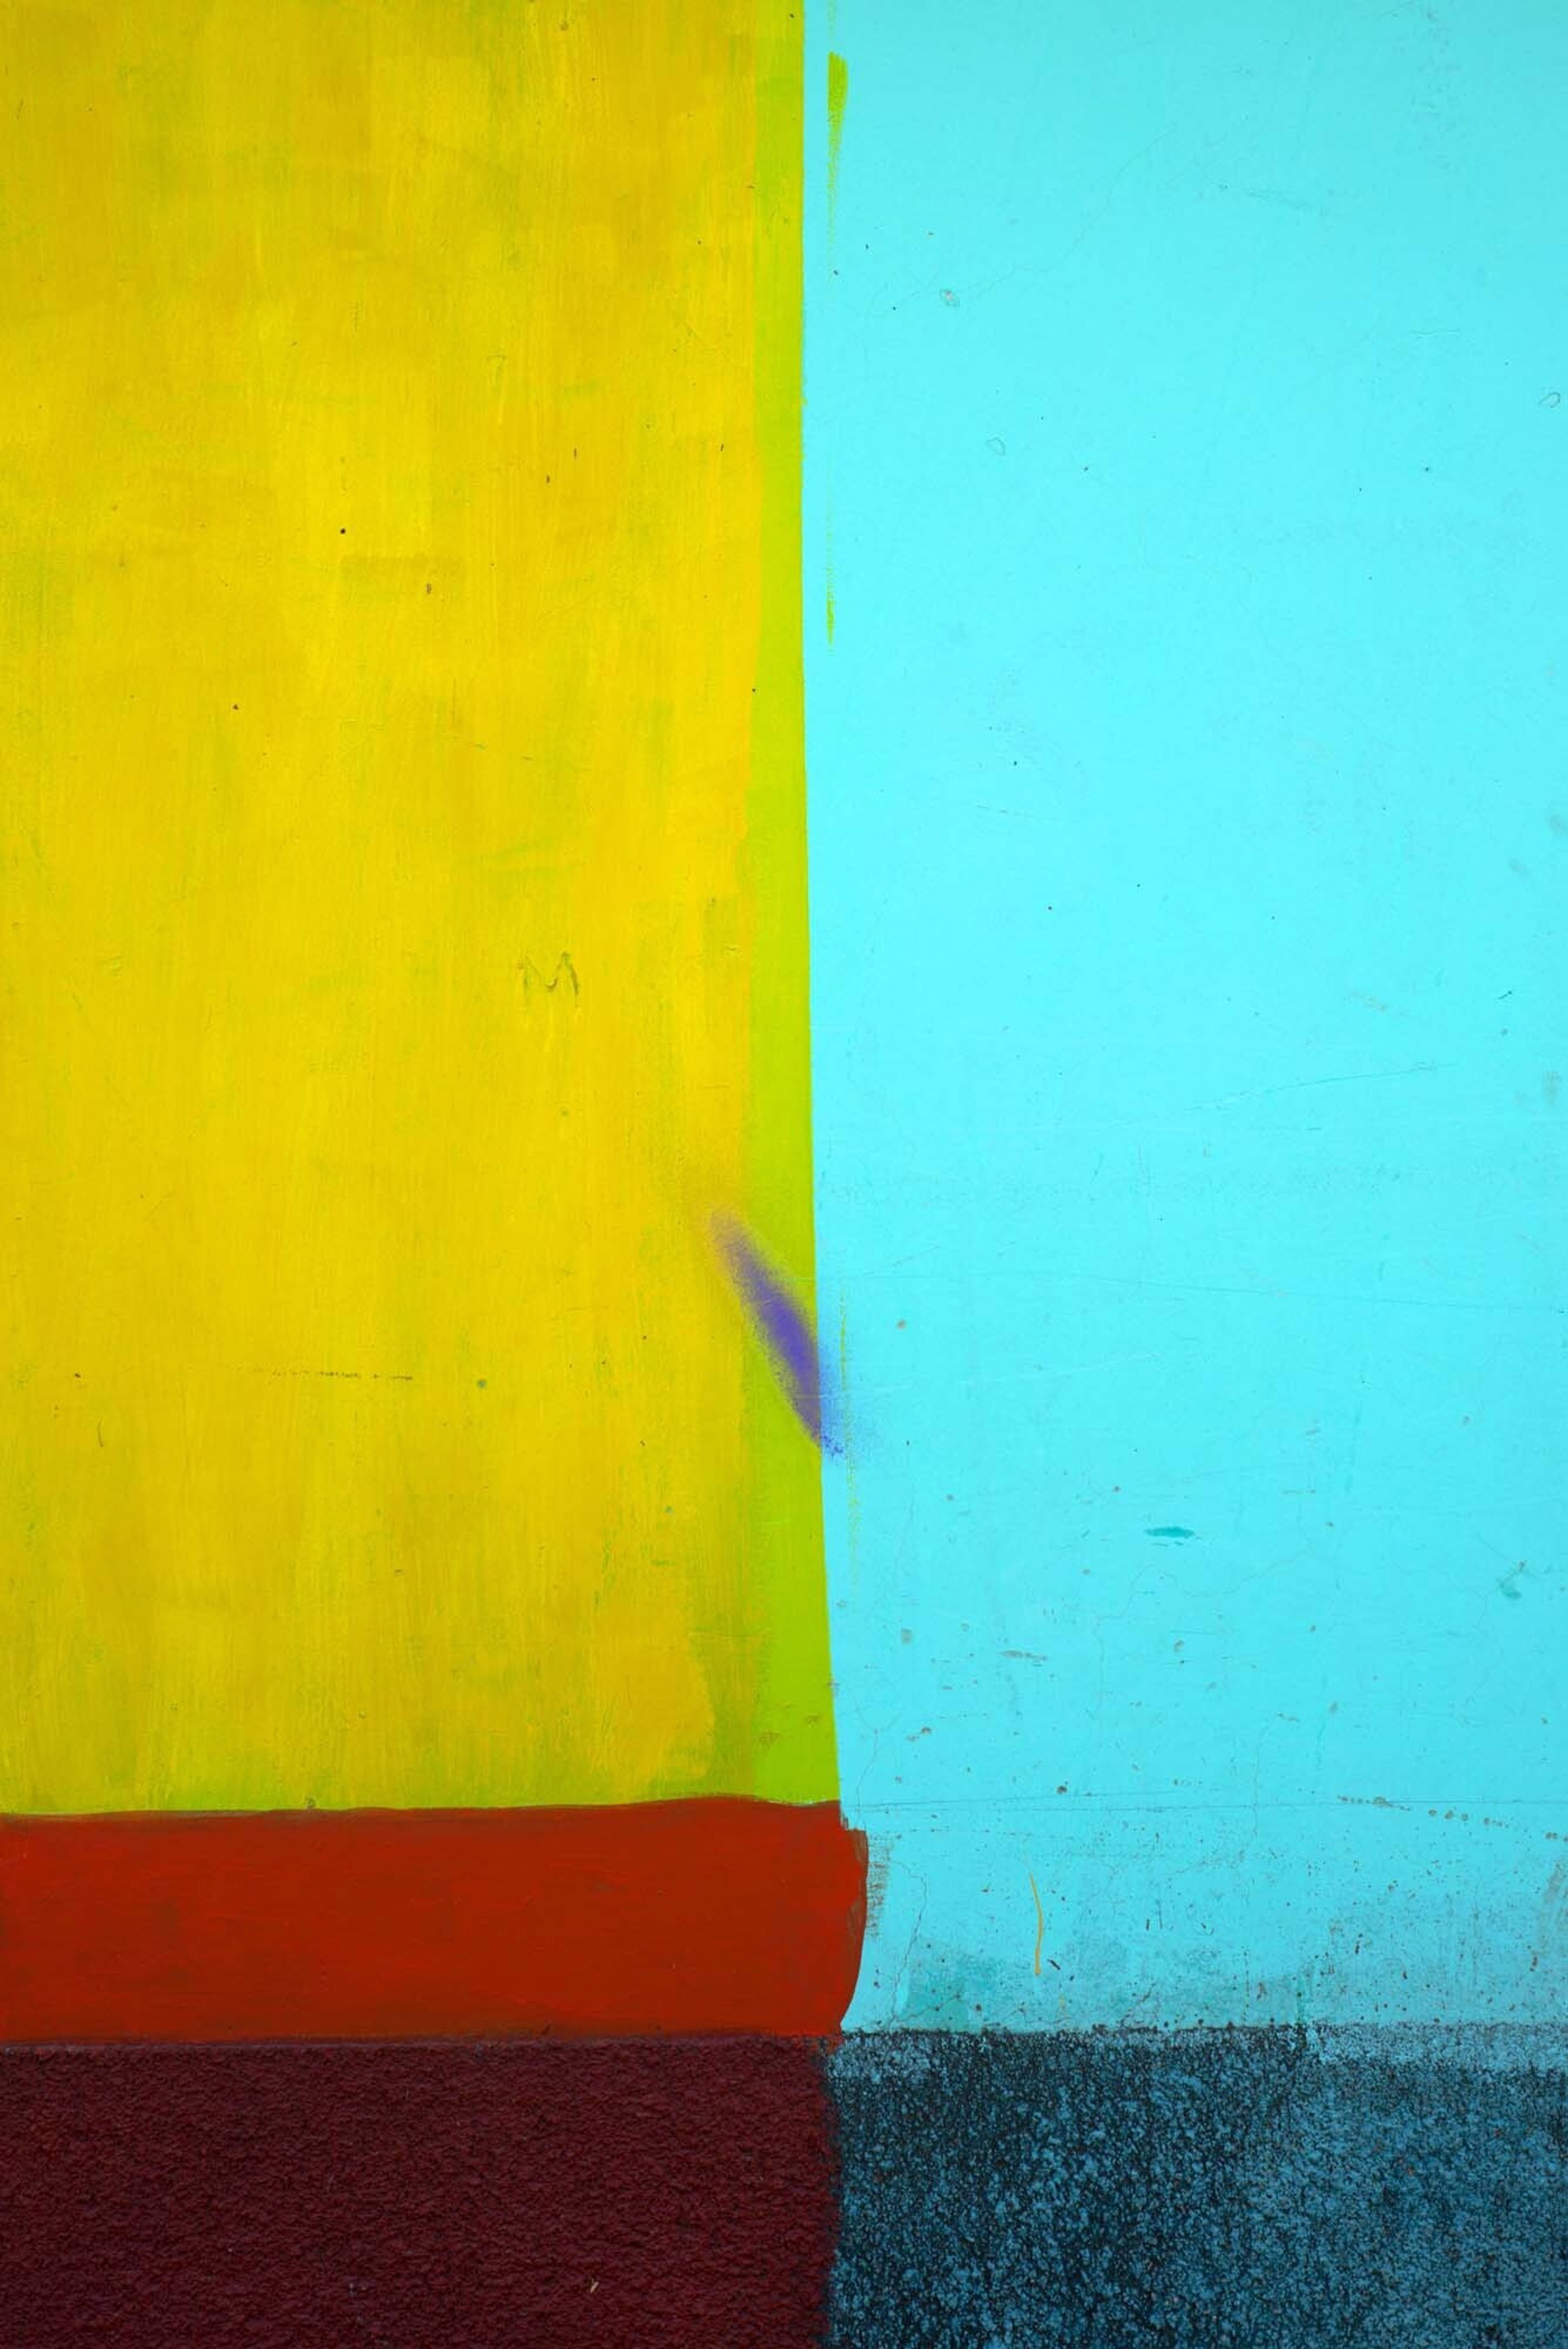 Finding the Universe in Oaxaca, Yellow, Red, Blue by Gary Goldberg